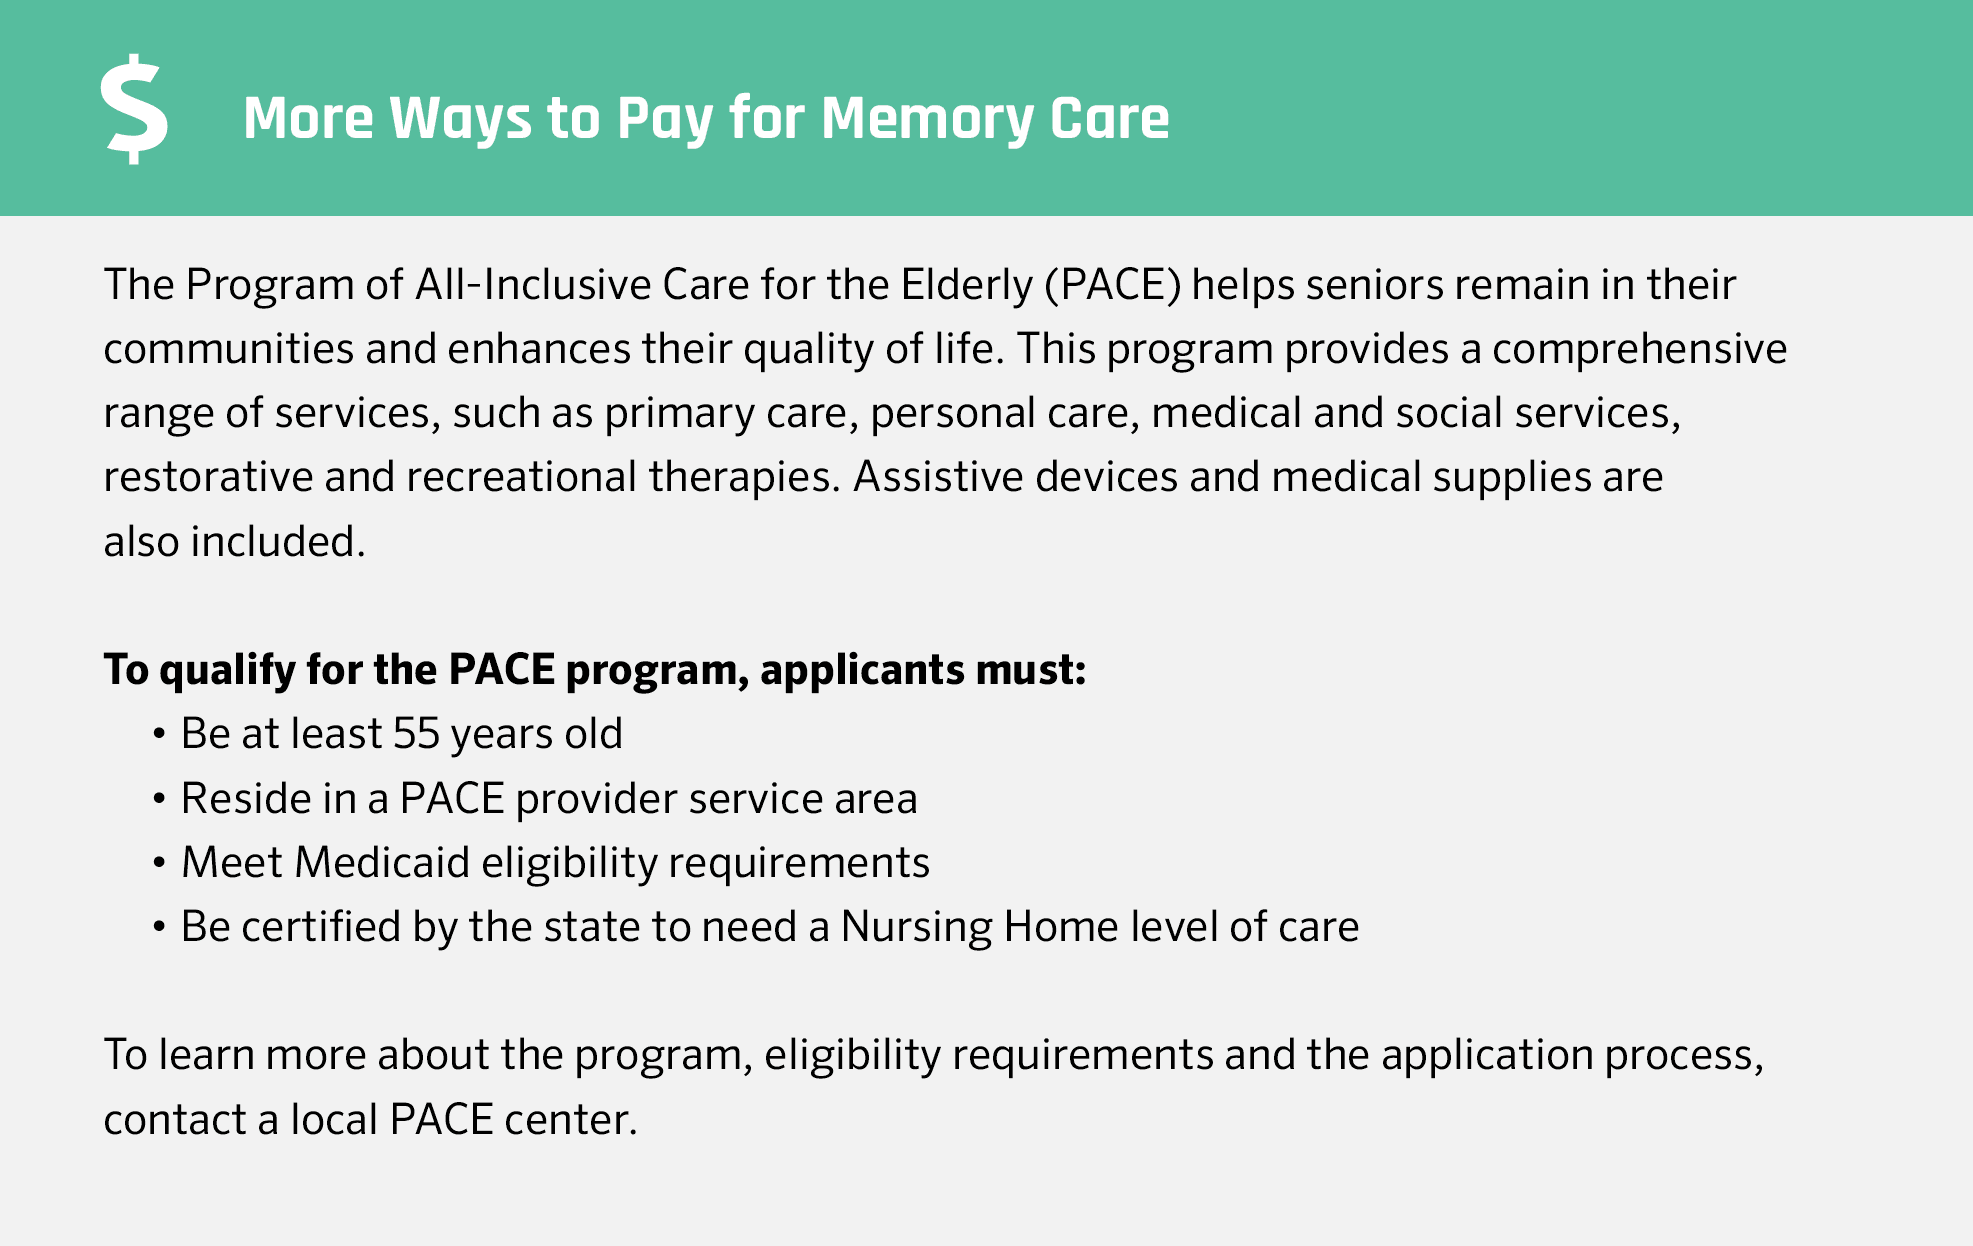 Financial Assistance for Memory Care in Louisiana